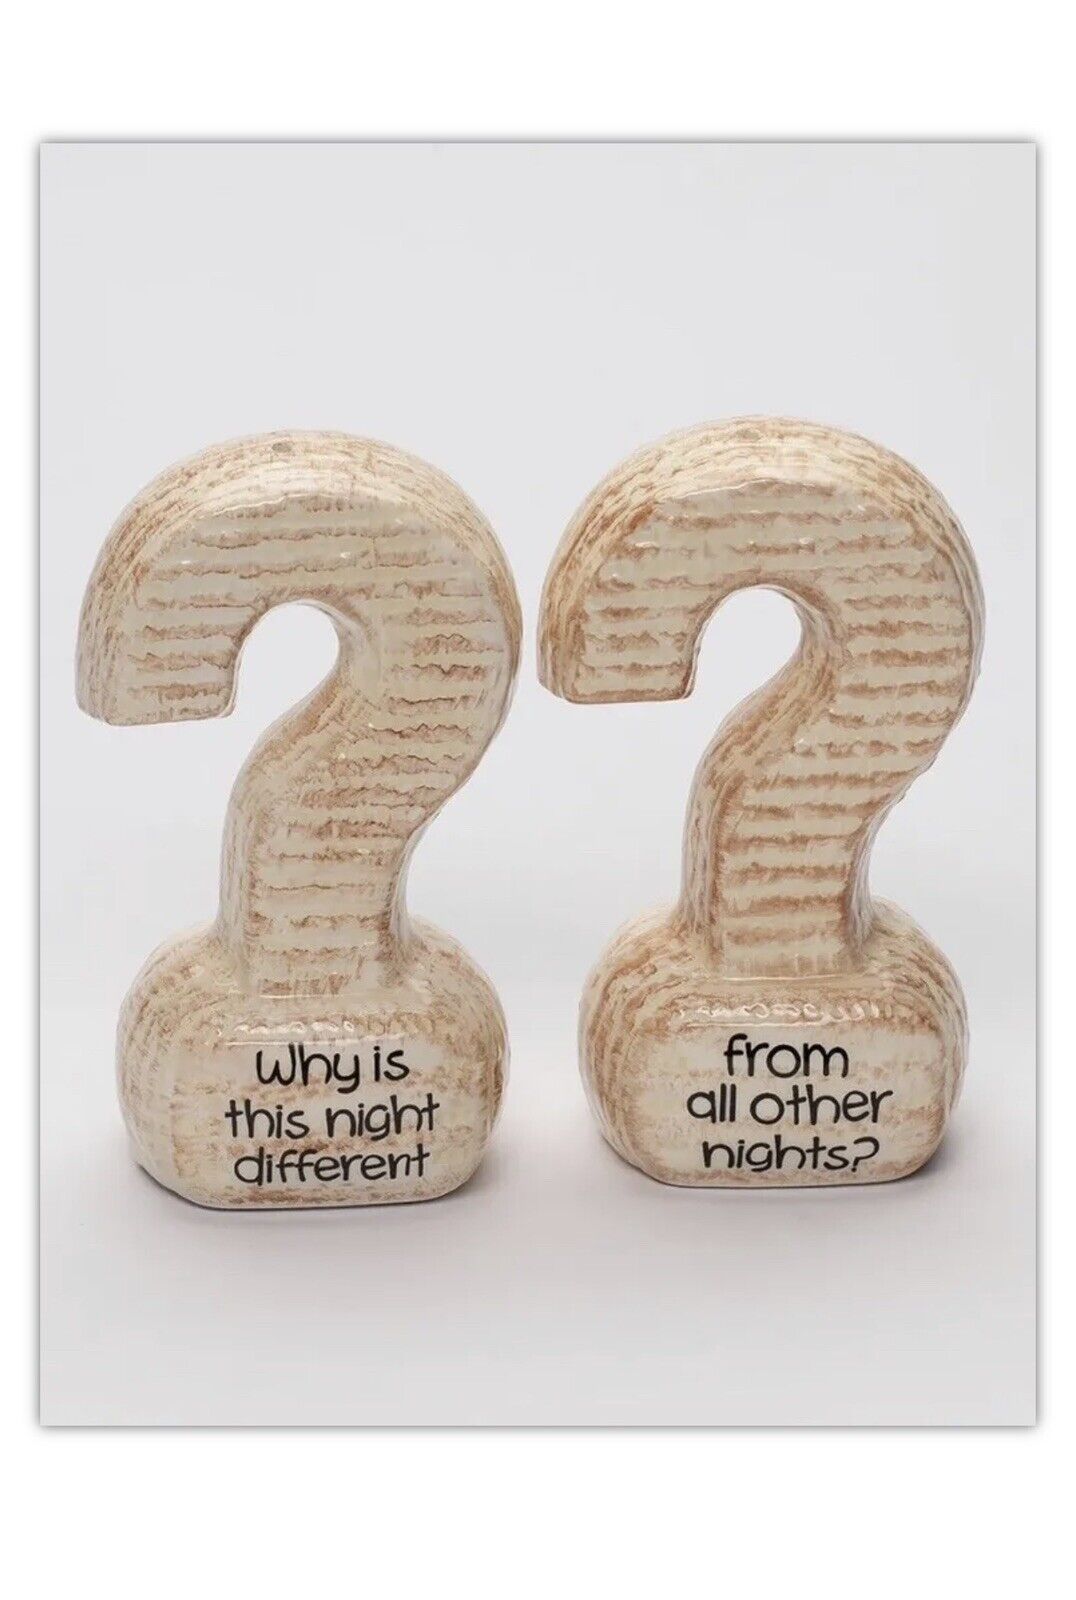 PASSOVER CERAMIC MATZAH SALT & PEPPER SHAKERS QUESTION MARK WHY IS THIS NIGHT DF